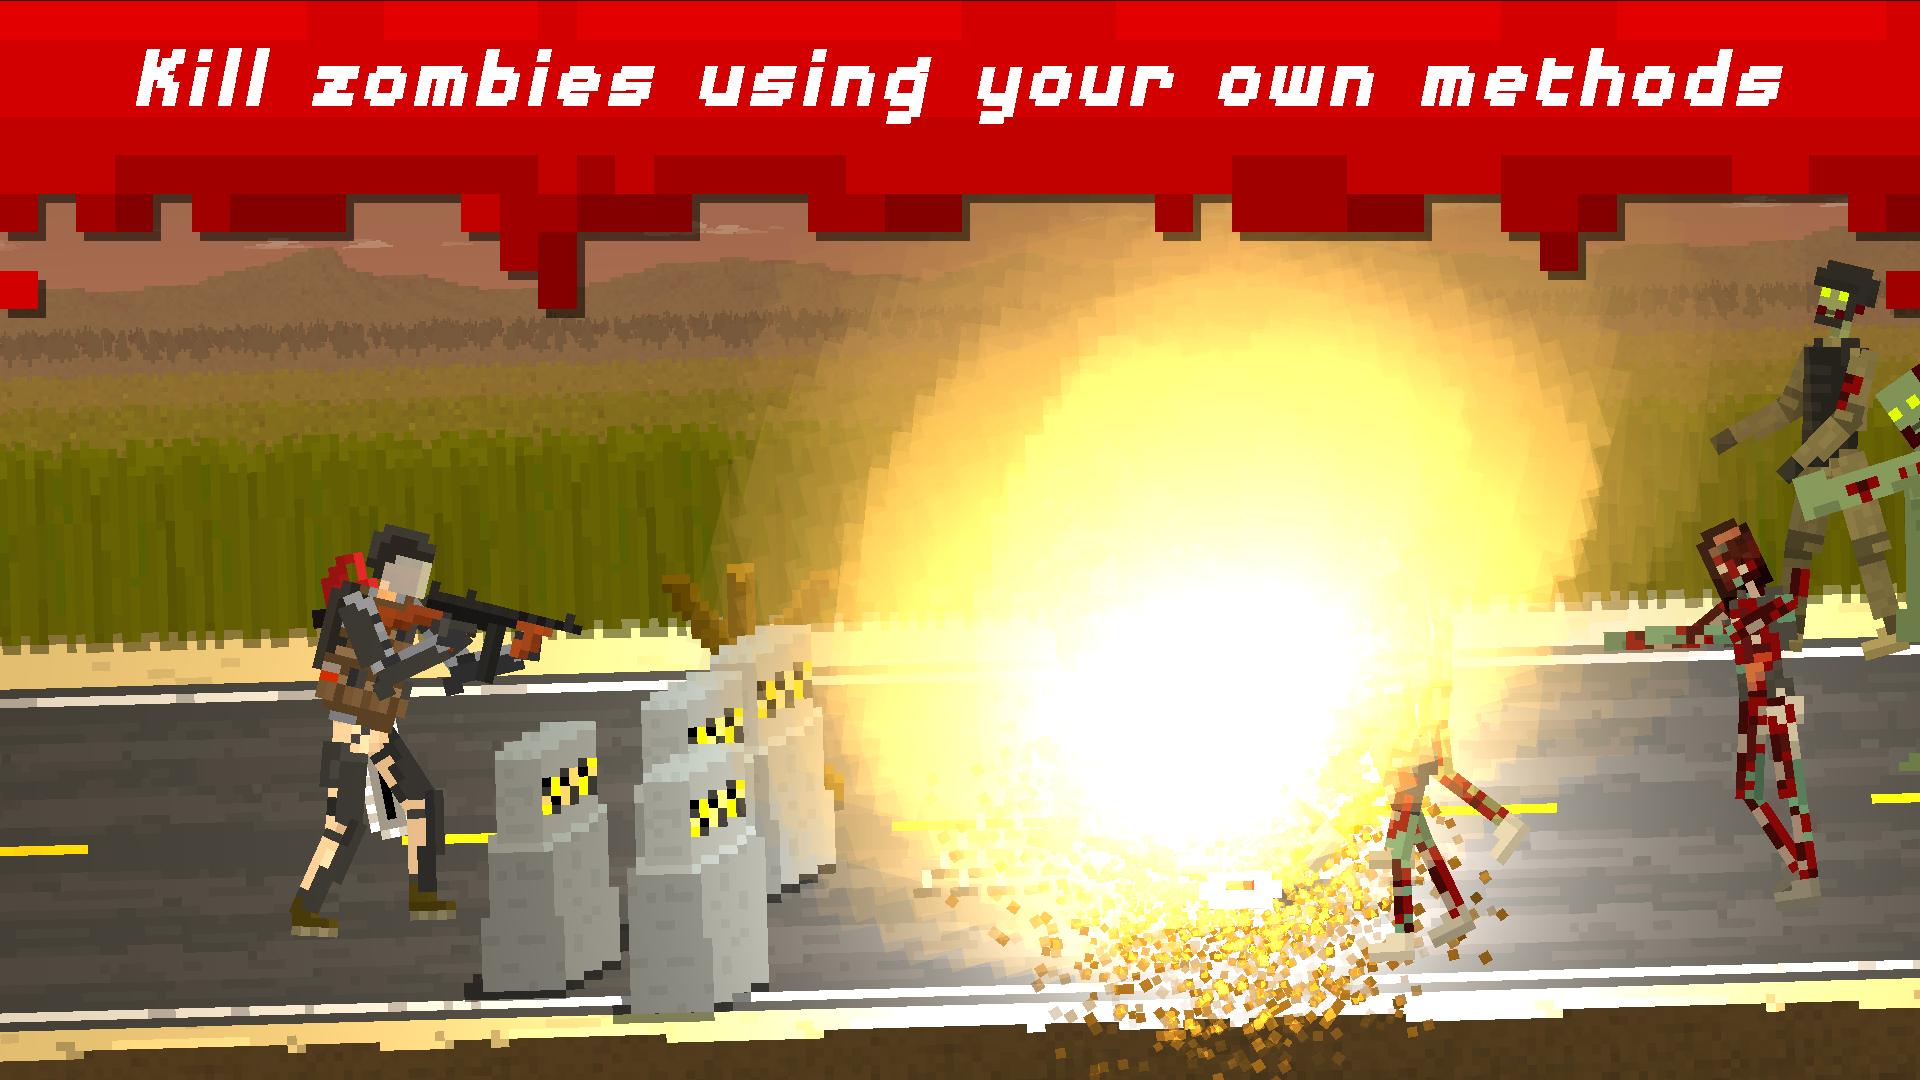 They are coming game. They are coming Zombie Defense. They are coming: Zombie shooting & Defense. Ультимейт зомби дефенс.